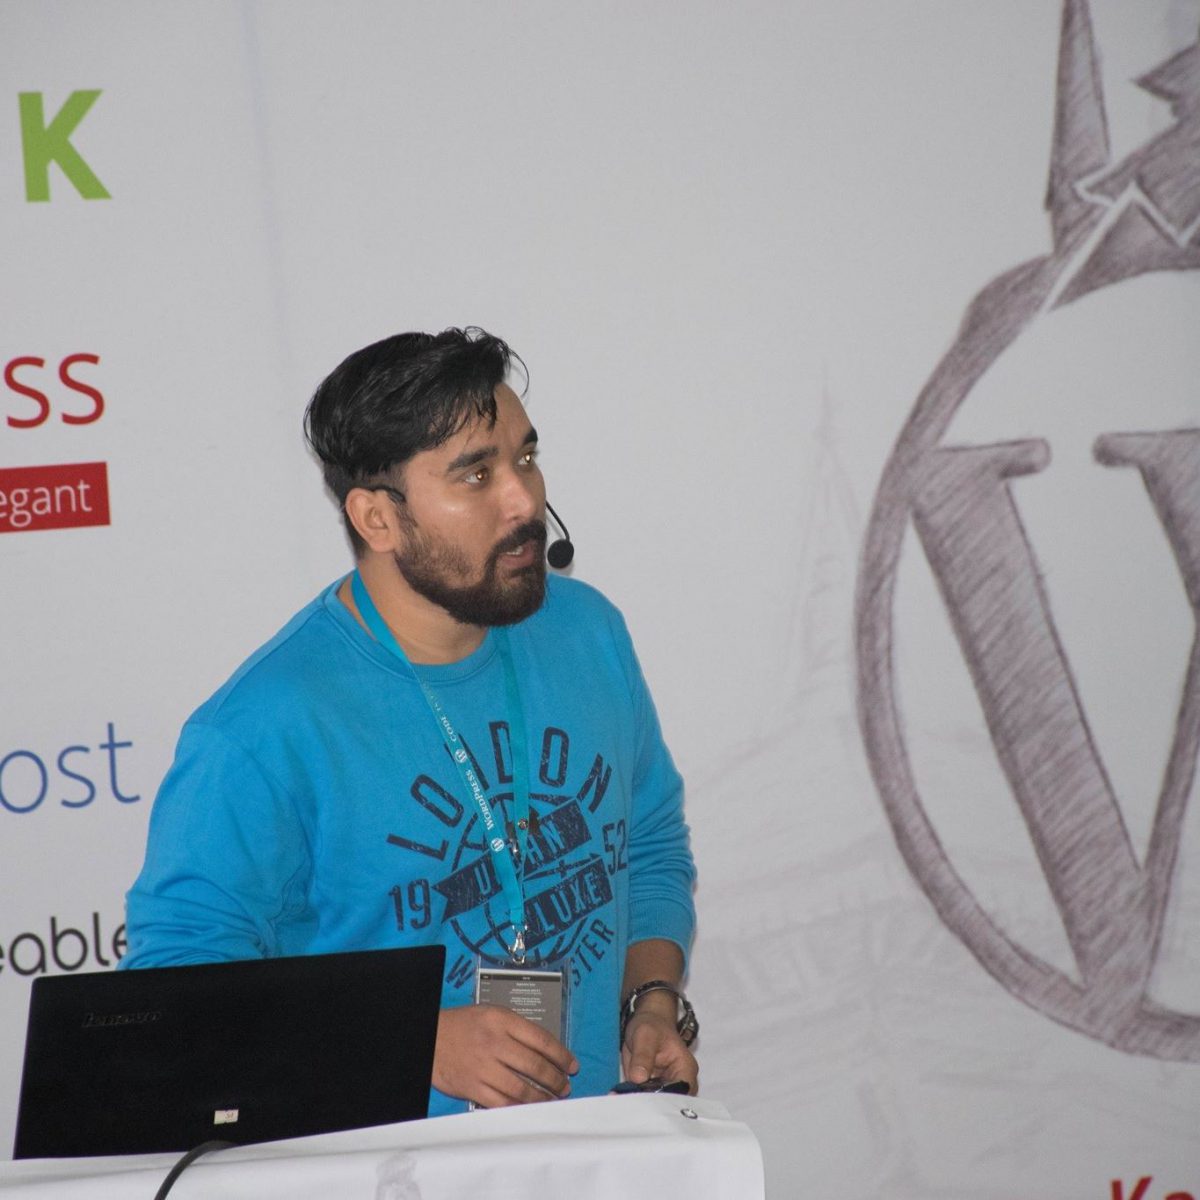 Utsav Singh Rathour will help us make the most out of WordCamps